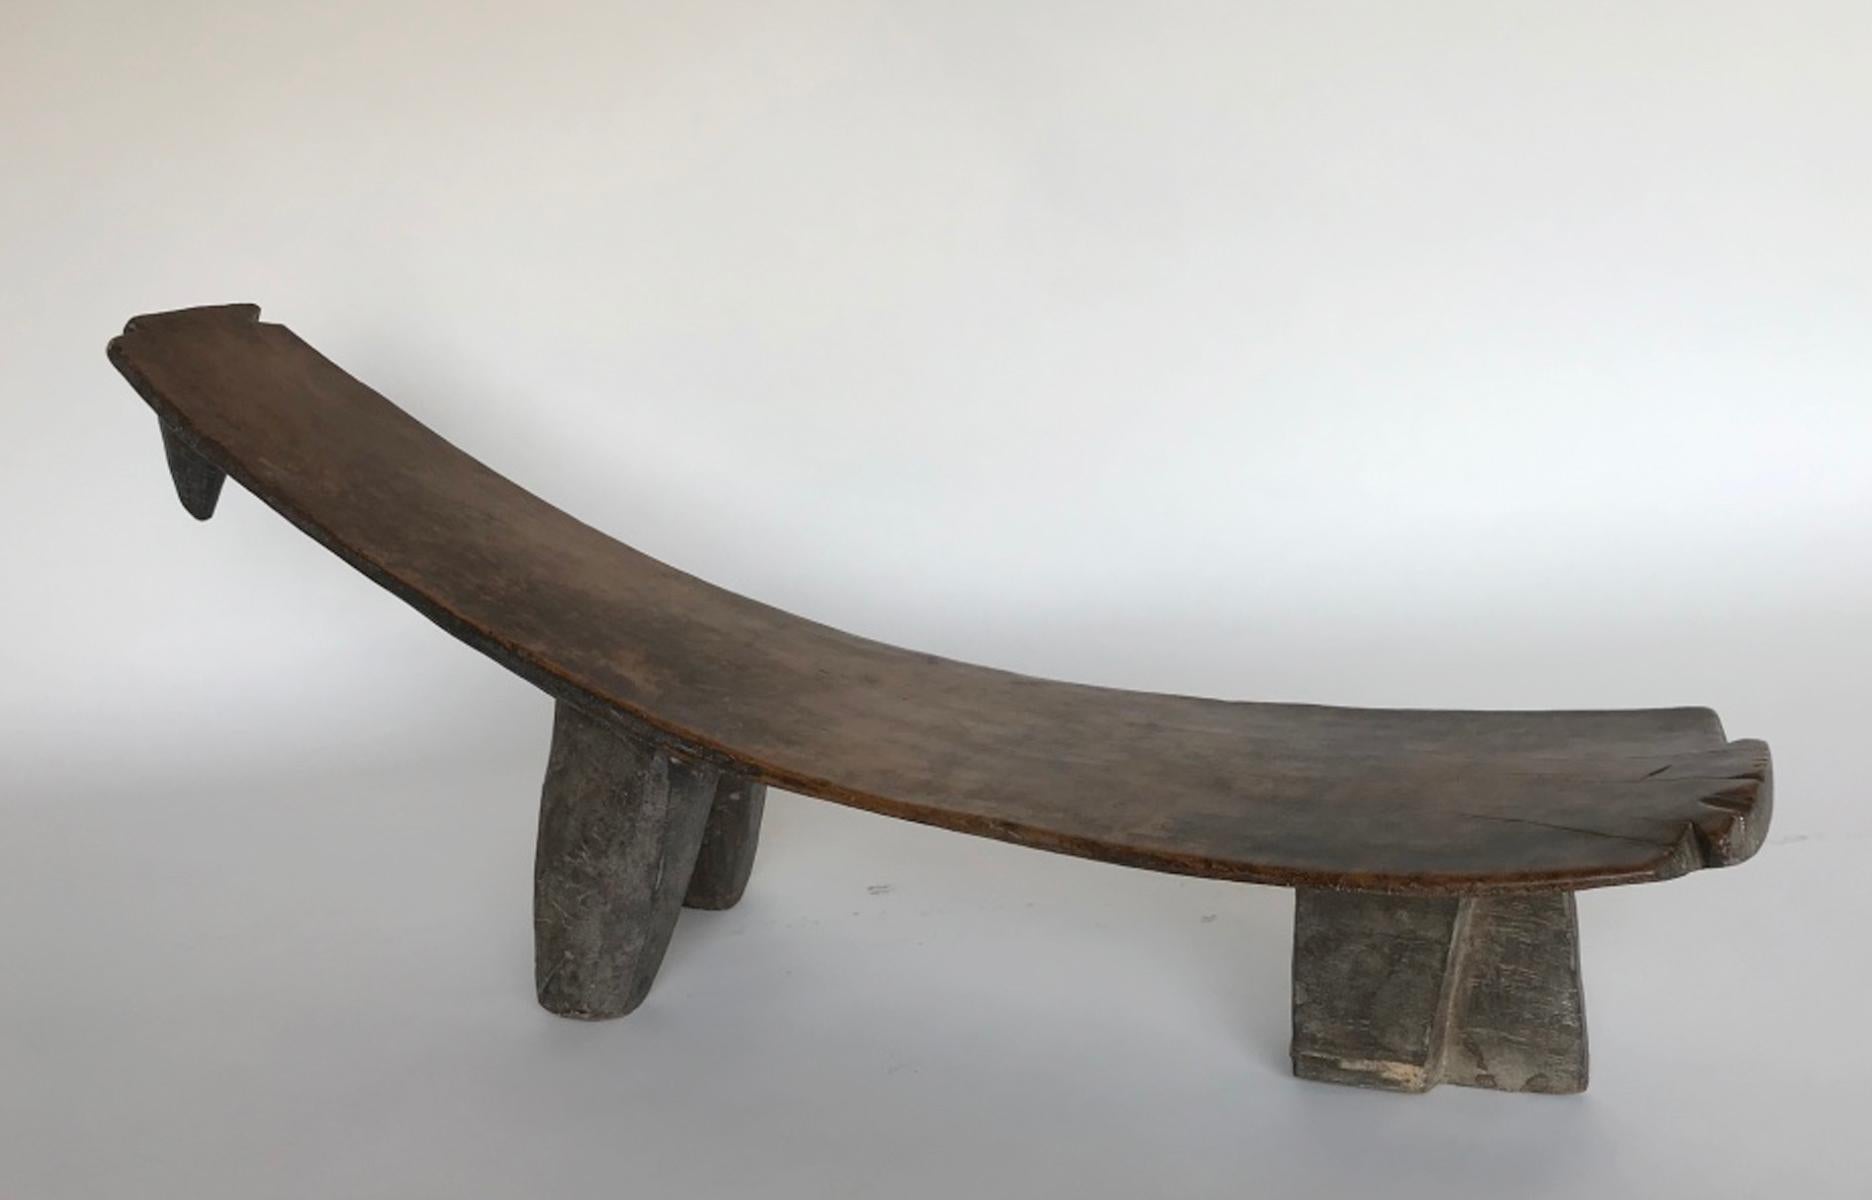 Burkinabe Antique Wooden Bench by the Lobi People of Africa